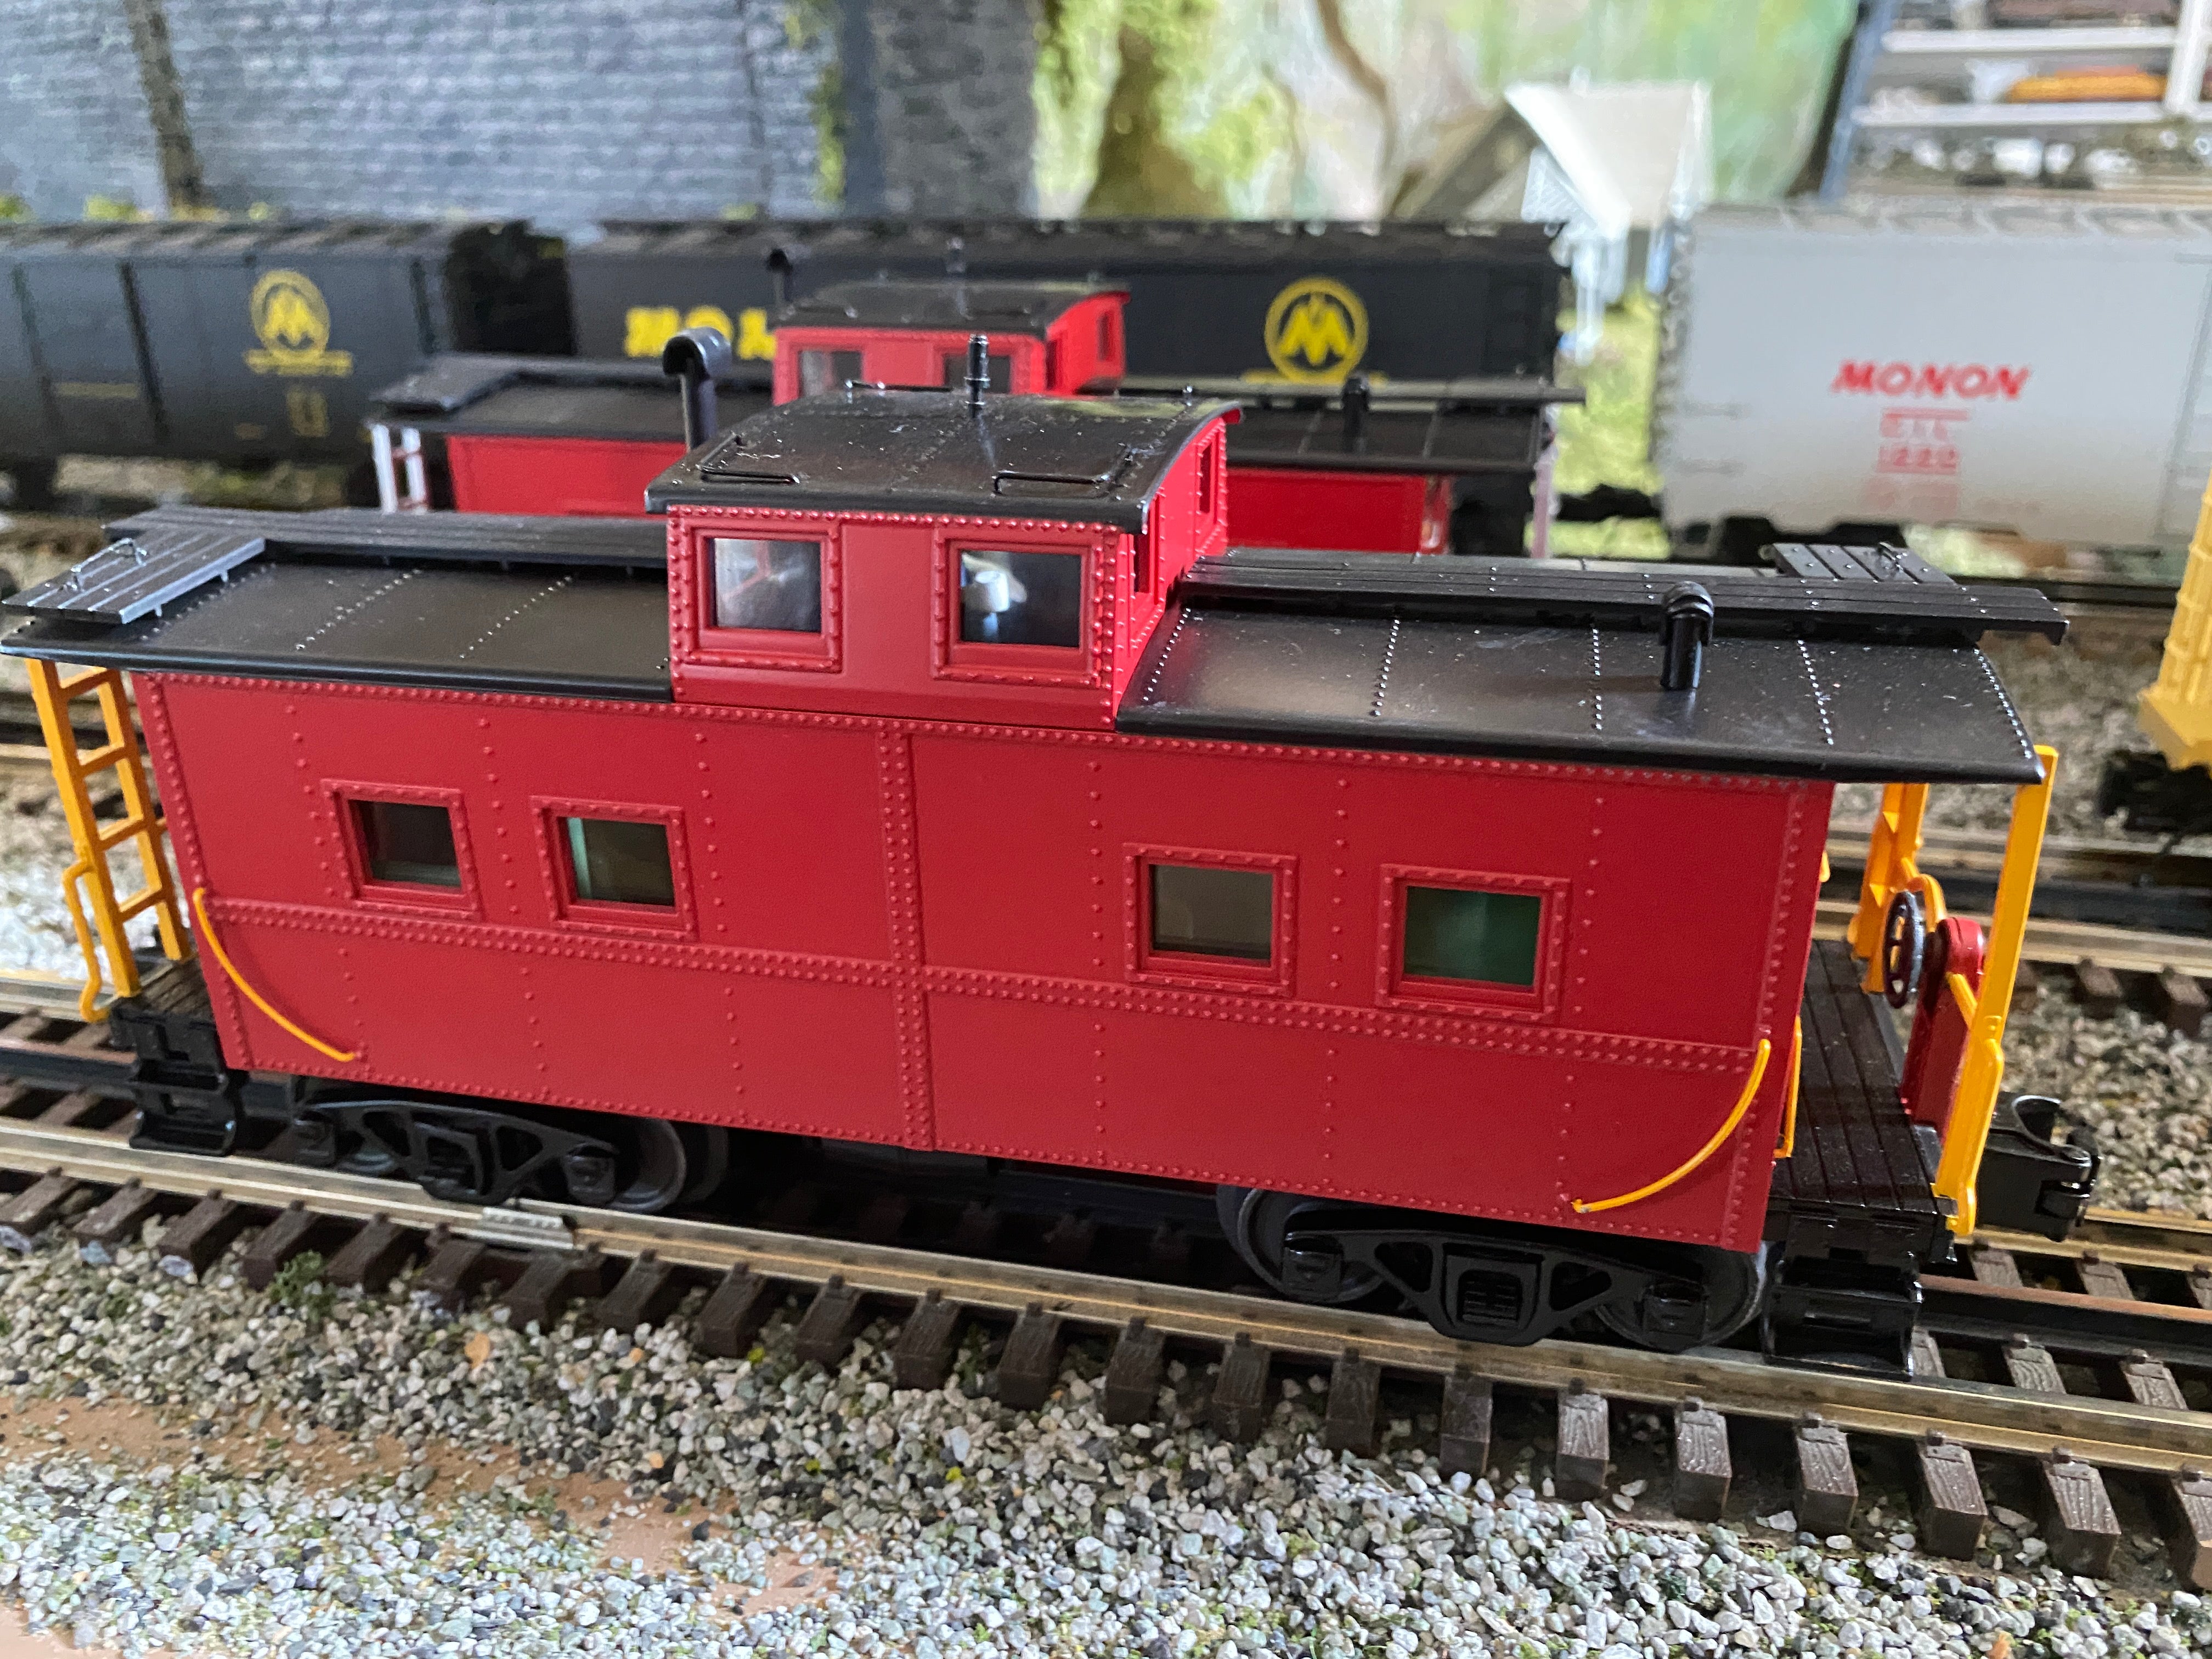 MTH 20-91727 - Steel Caboose (Center Cupola) "Unlettered" - Custom Run for MrMuffin'sTrains